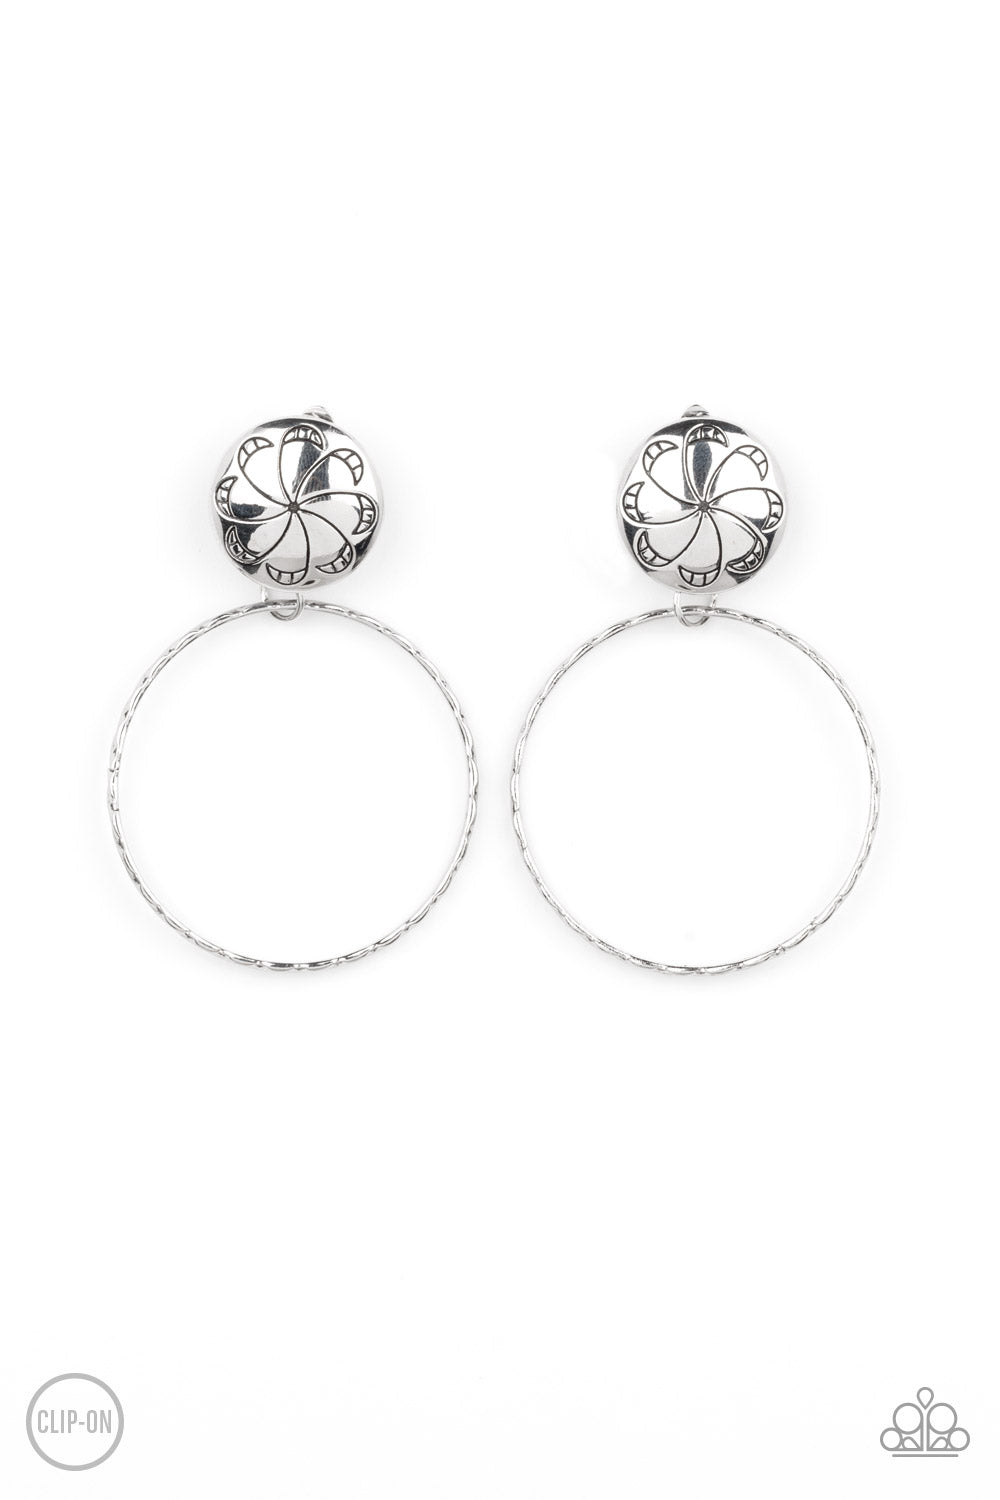 Rural Renewal Silver Clip-On Earring - Paparazzi Accessories  A textured silver hoop swings from the bottom of a silver fitting stamped in a frilly floral pattern, creating a whimsical display. Earring attaches to a standard clip-on fitting.  Sold as one pair of clip-on earrings.